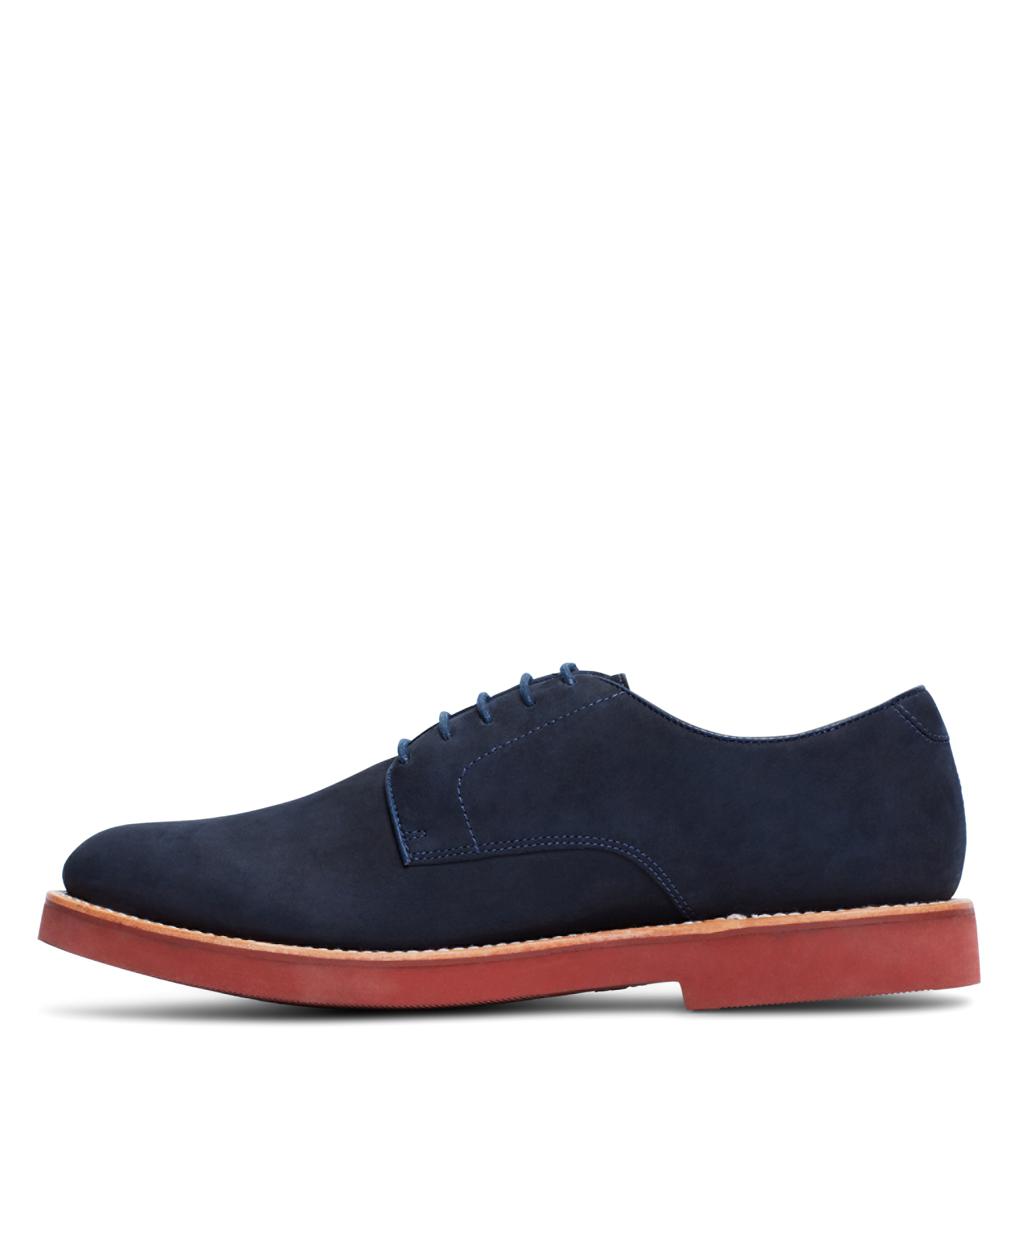 Brooks Brothers Classic Bucks in Navy (Blue) for Men - Lyst